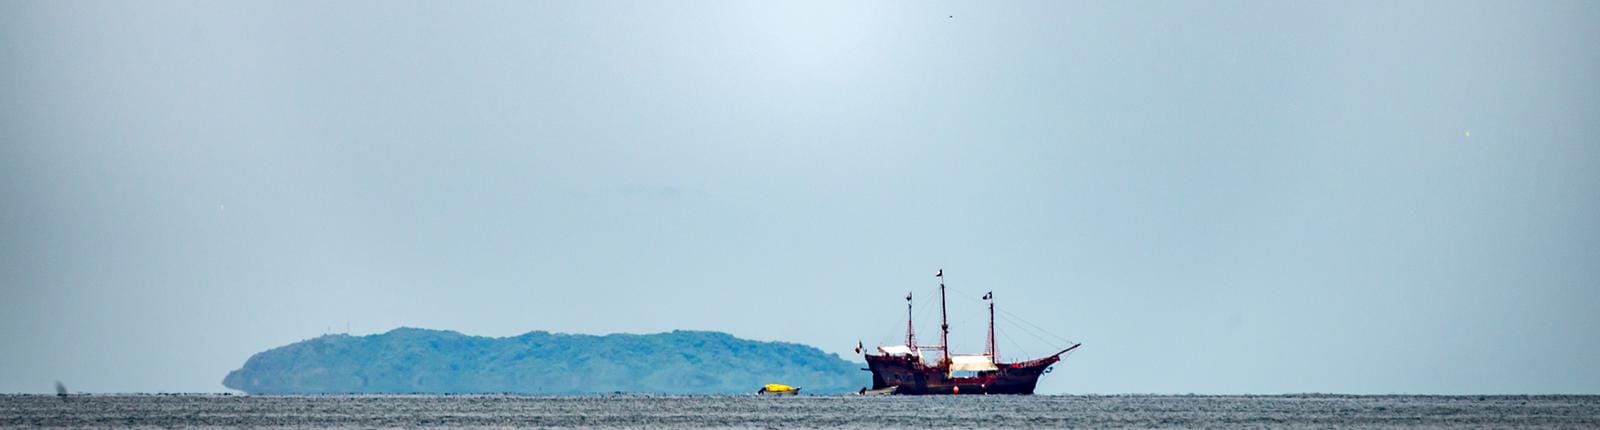 A large pirate ship in the open seas of Puerto Vallarta, Mexico